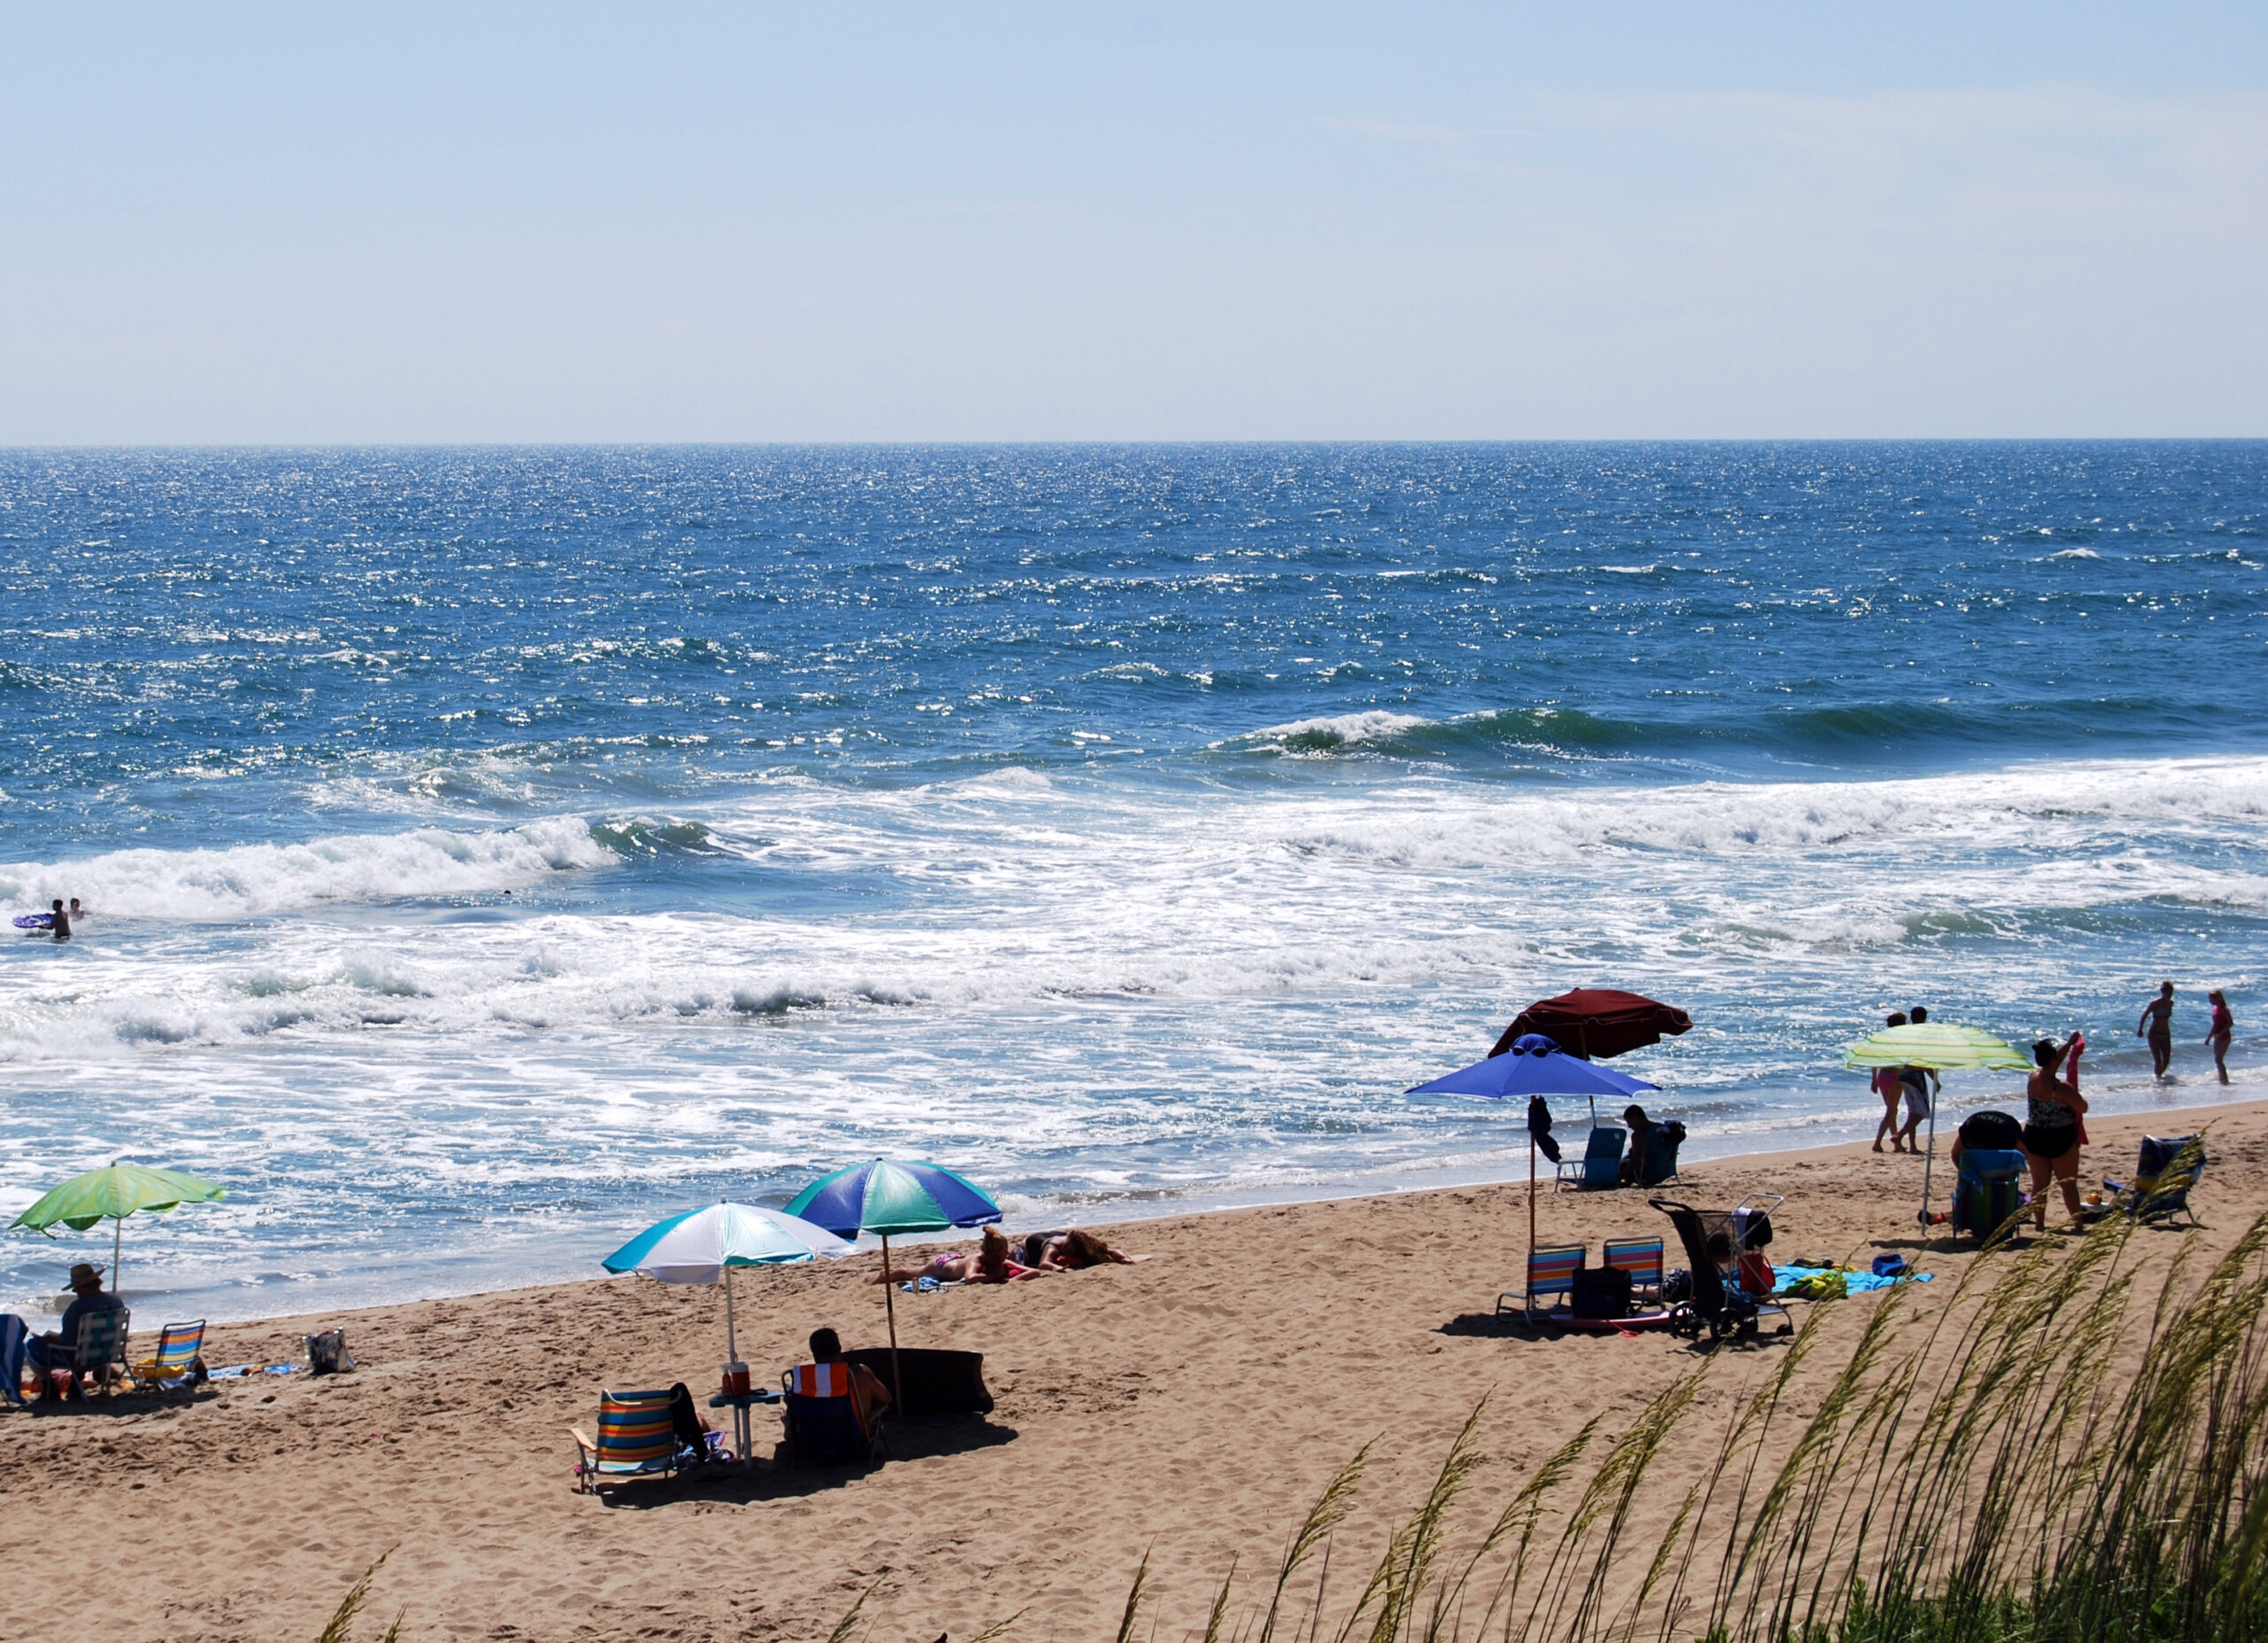 A view of rip currents from the shore of a beach in the Outer Banks